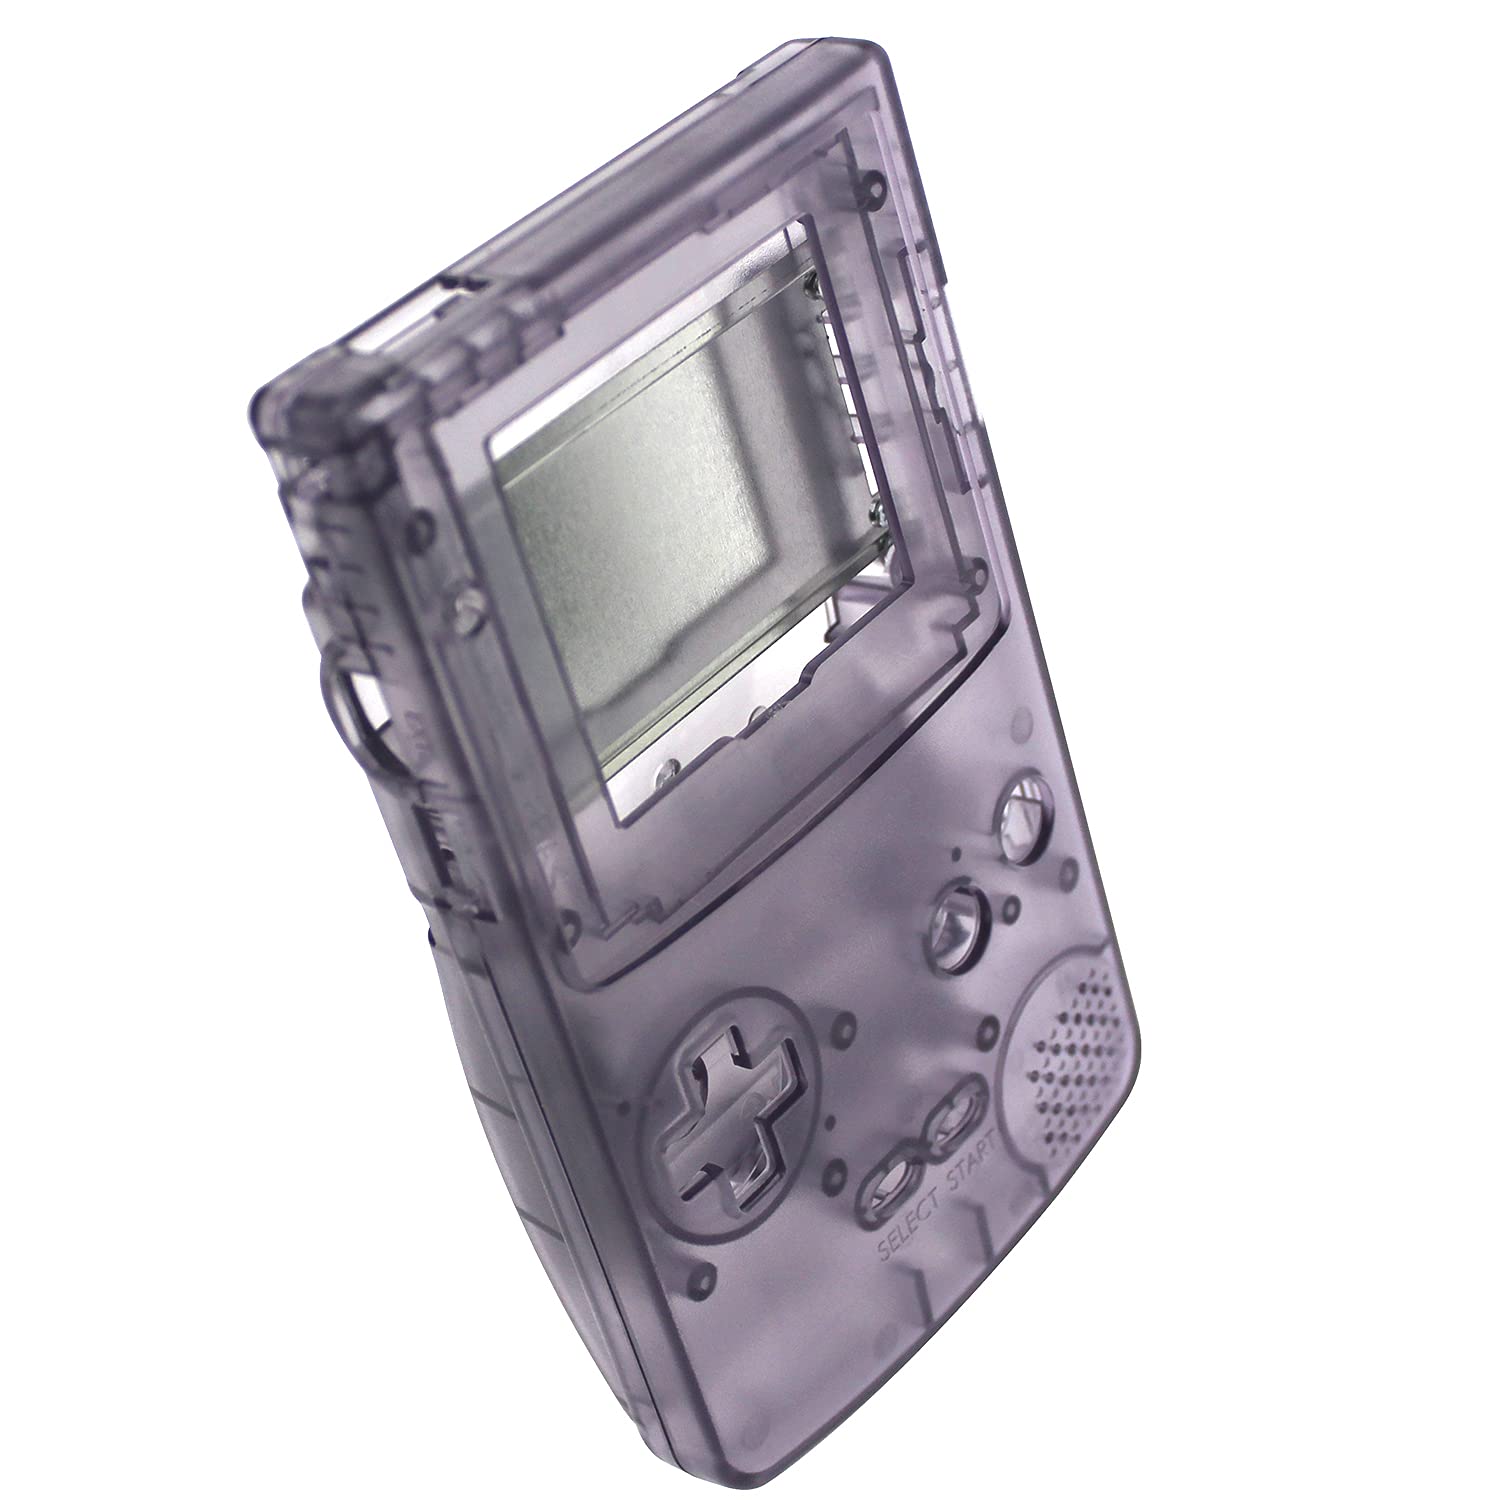 OSTENT Full Housing Shell Case Cover Replacement for Nintendo GBC Gameboy Color Console - Color Clear Purple